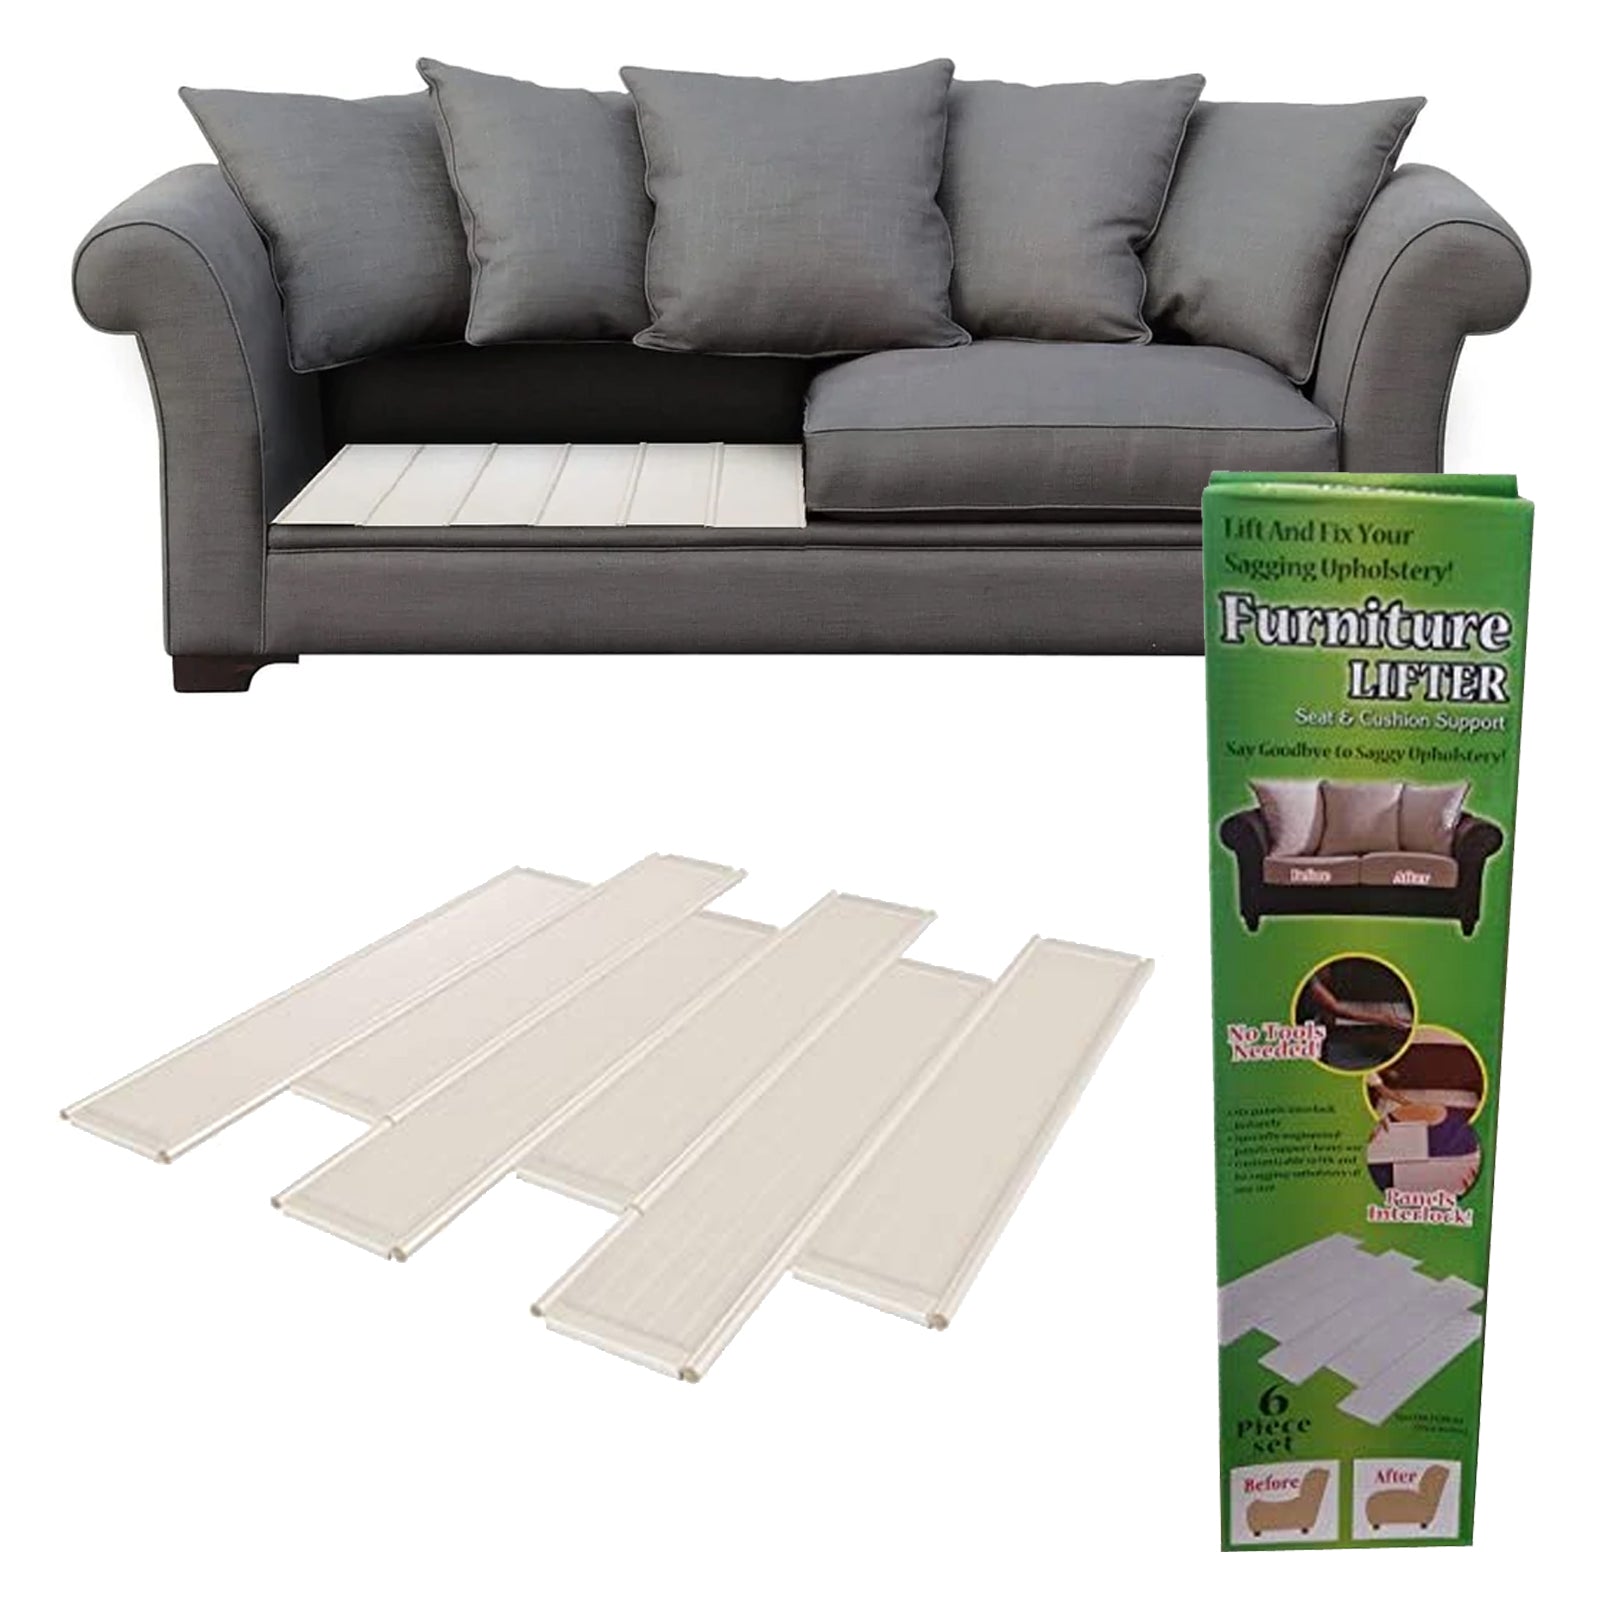 Couch Support, Sofa Support for Sagging Cushions, Couch